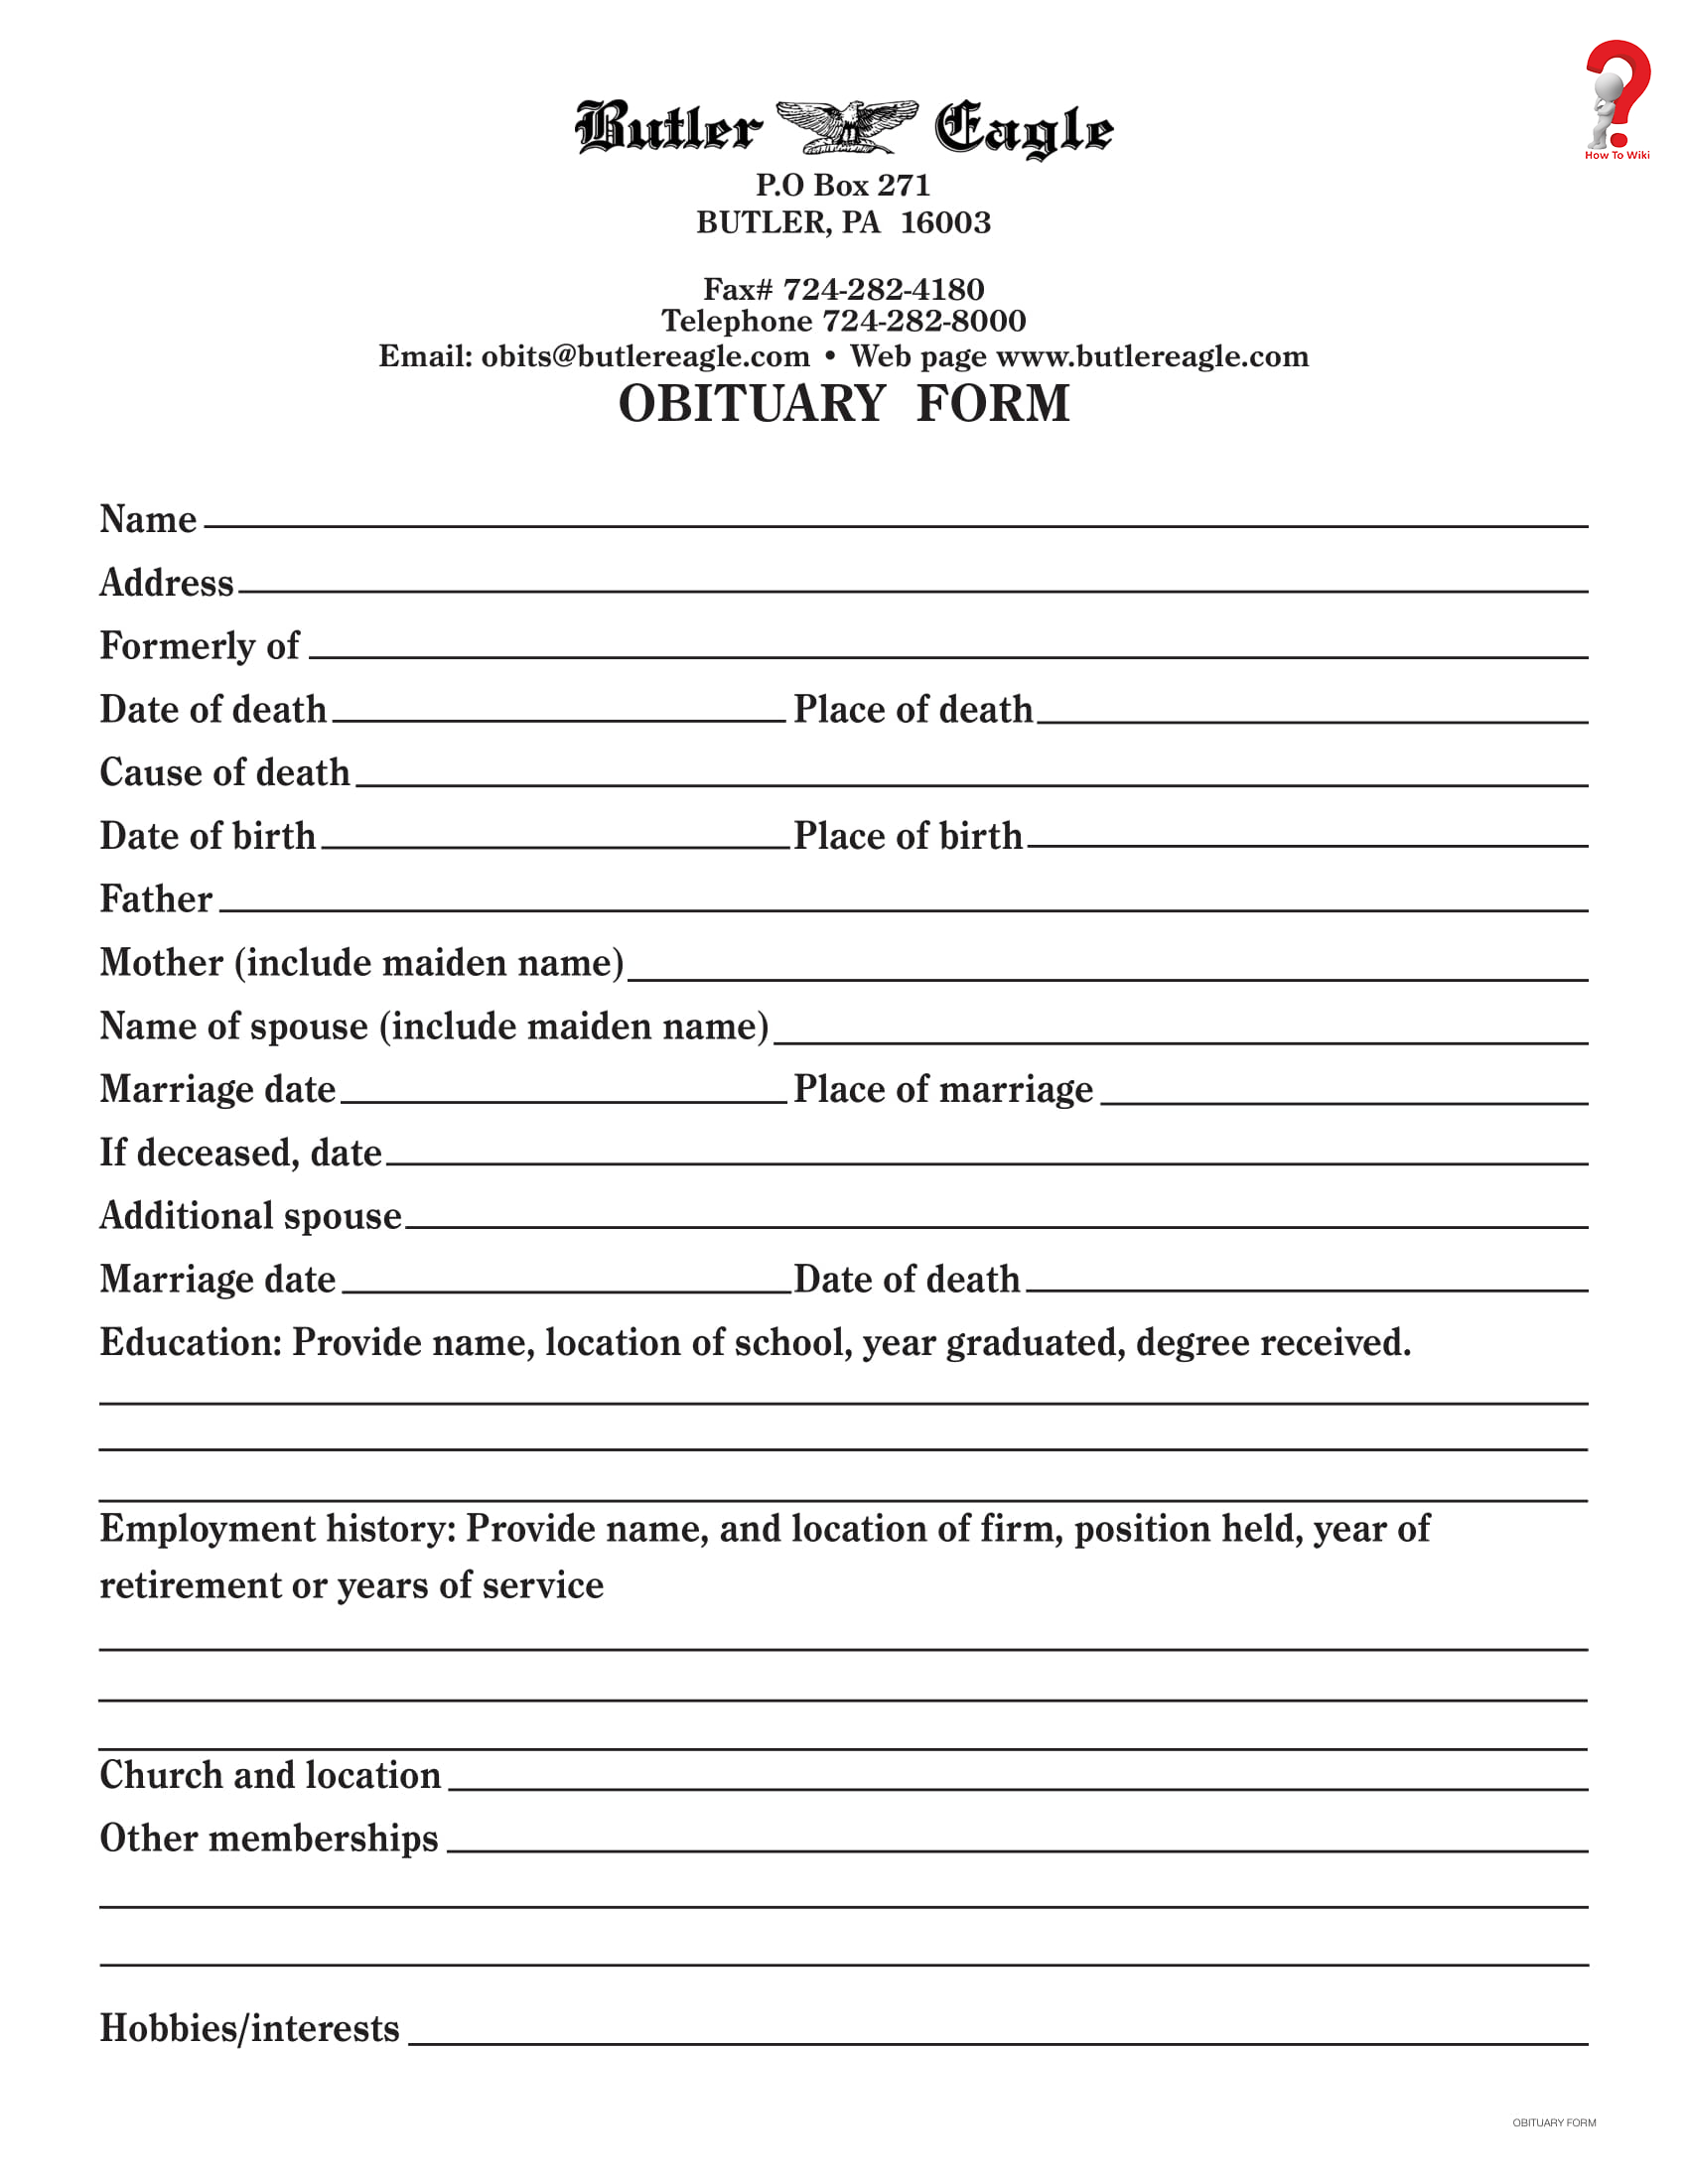 Blank Obituary Form Template Pdf Doc 1 | How To Wiki Pertaining To Fill In The Blank Obituary Template